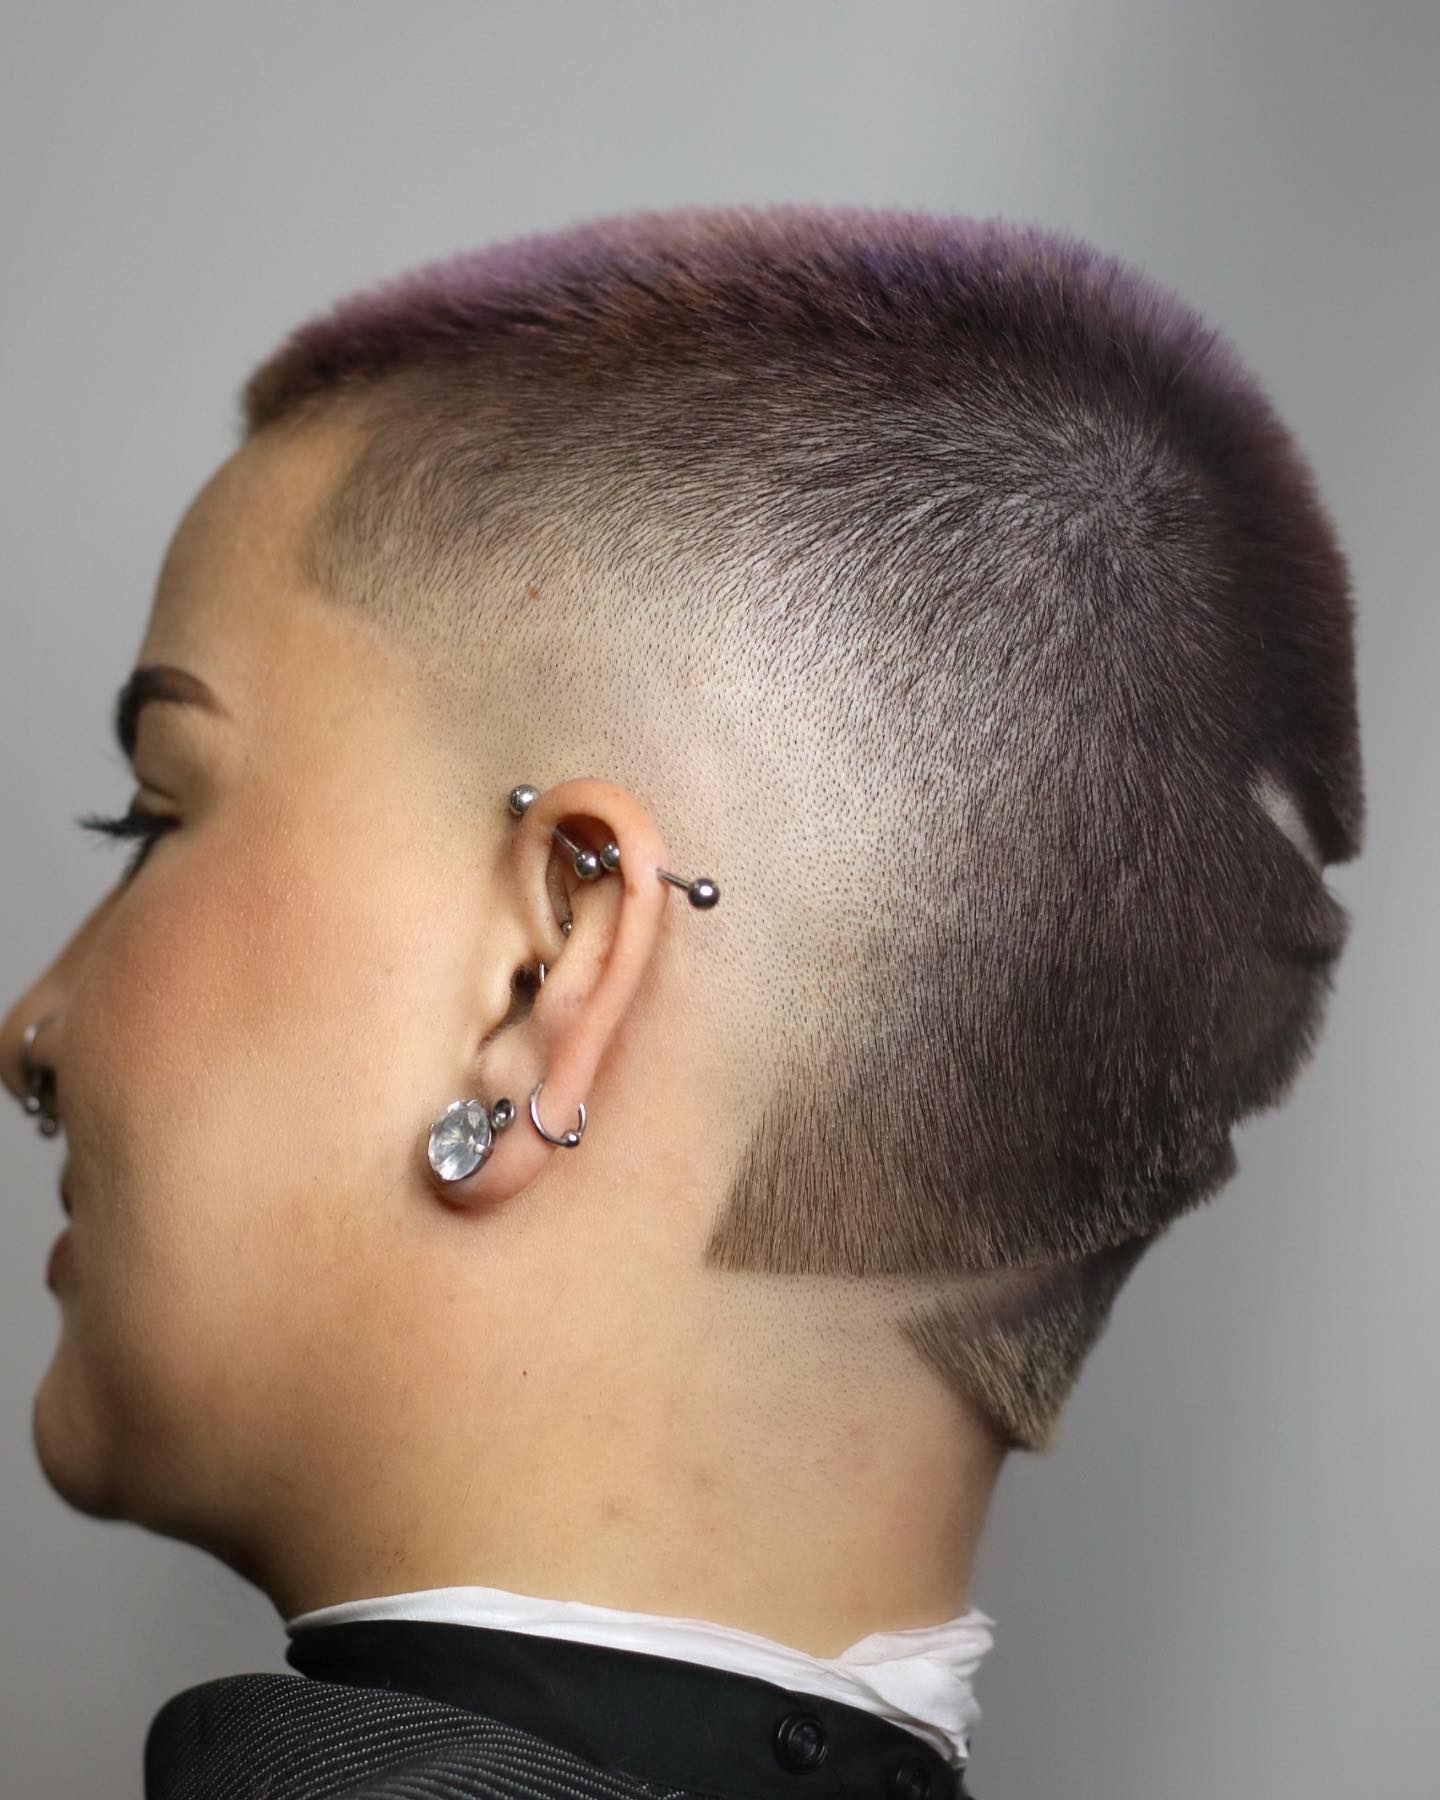 Tapered Fade Buzz Cut with Purple Shade on Top